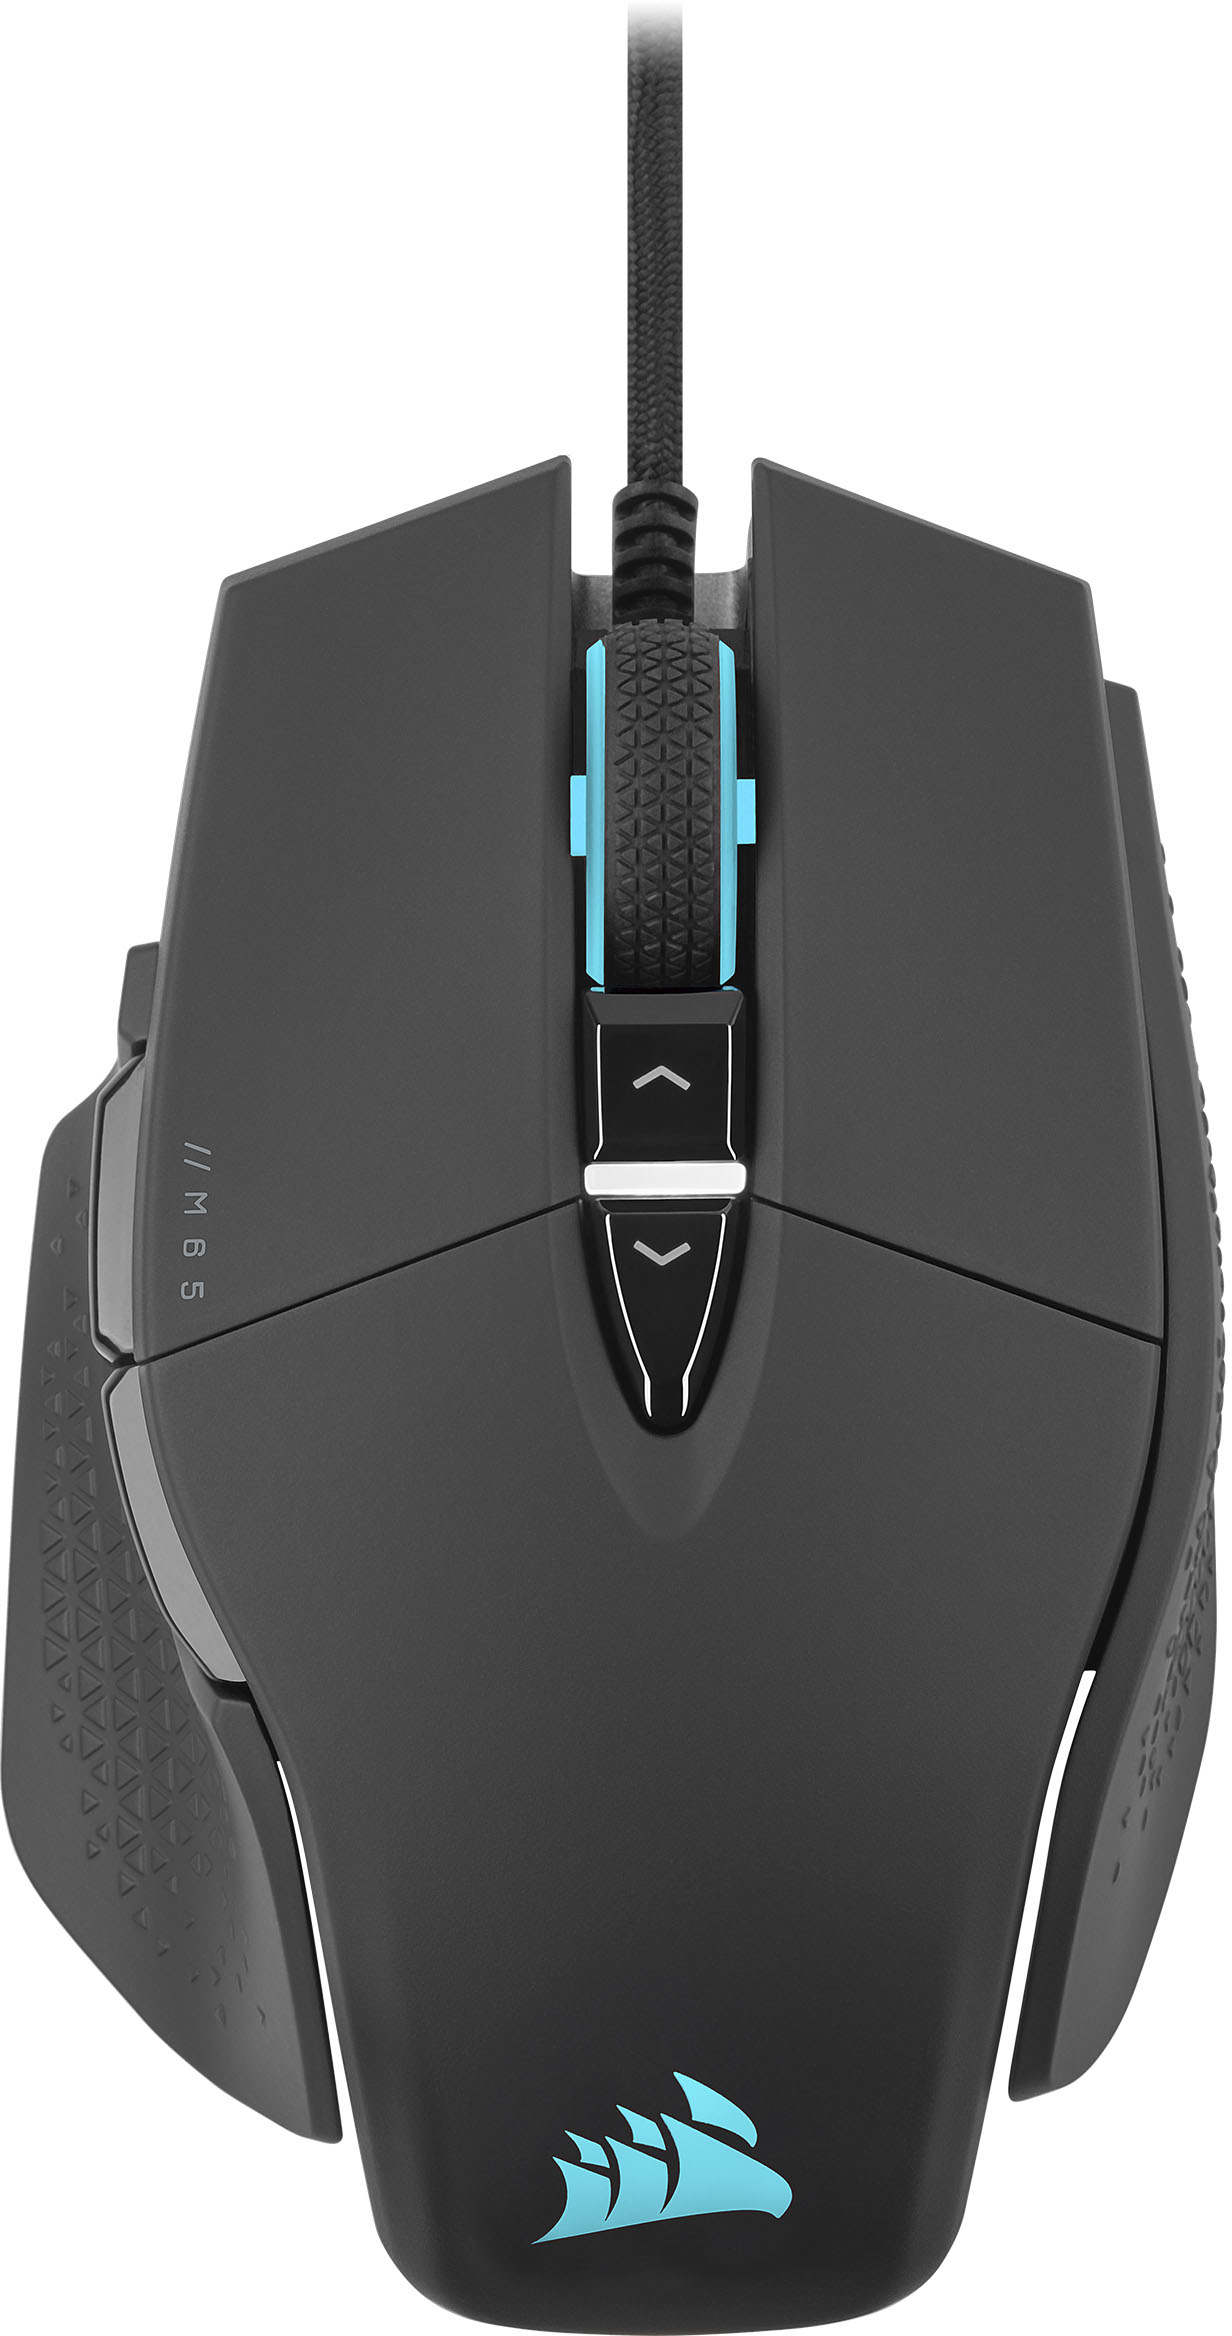 CORSAIR Black Best Adjustable Buy Wired Gaming CH-9309411-NA2 Ultra Weights RGB Mouse - M65 Optical with